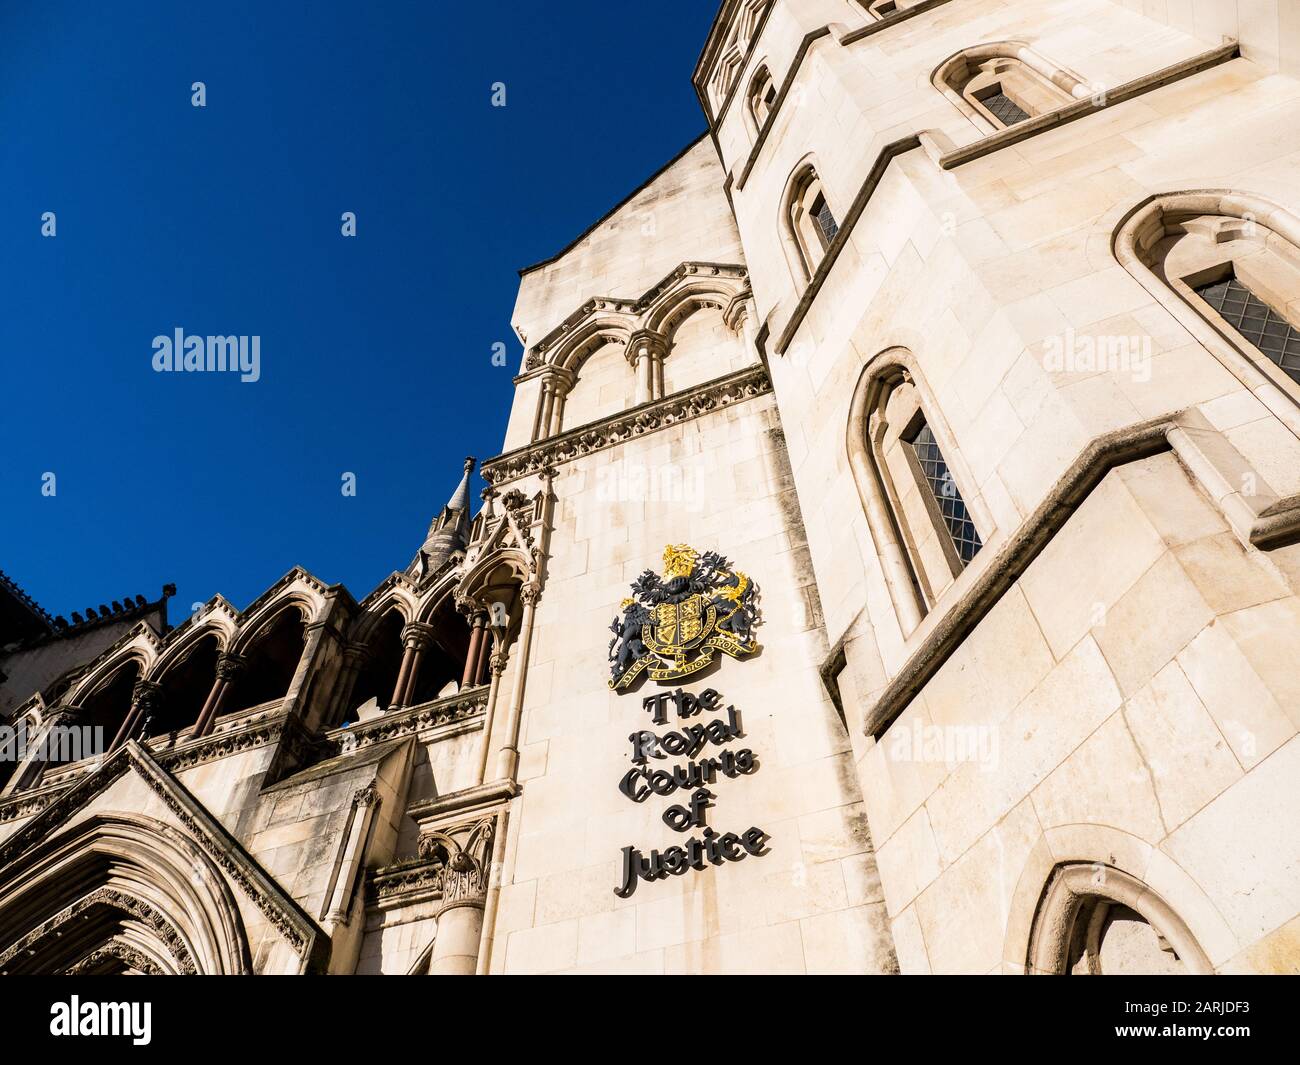 Royal Courts of Justice, Court Building, The Strand, London, England, UK, GB. Stock Photo